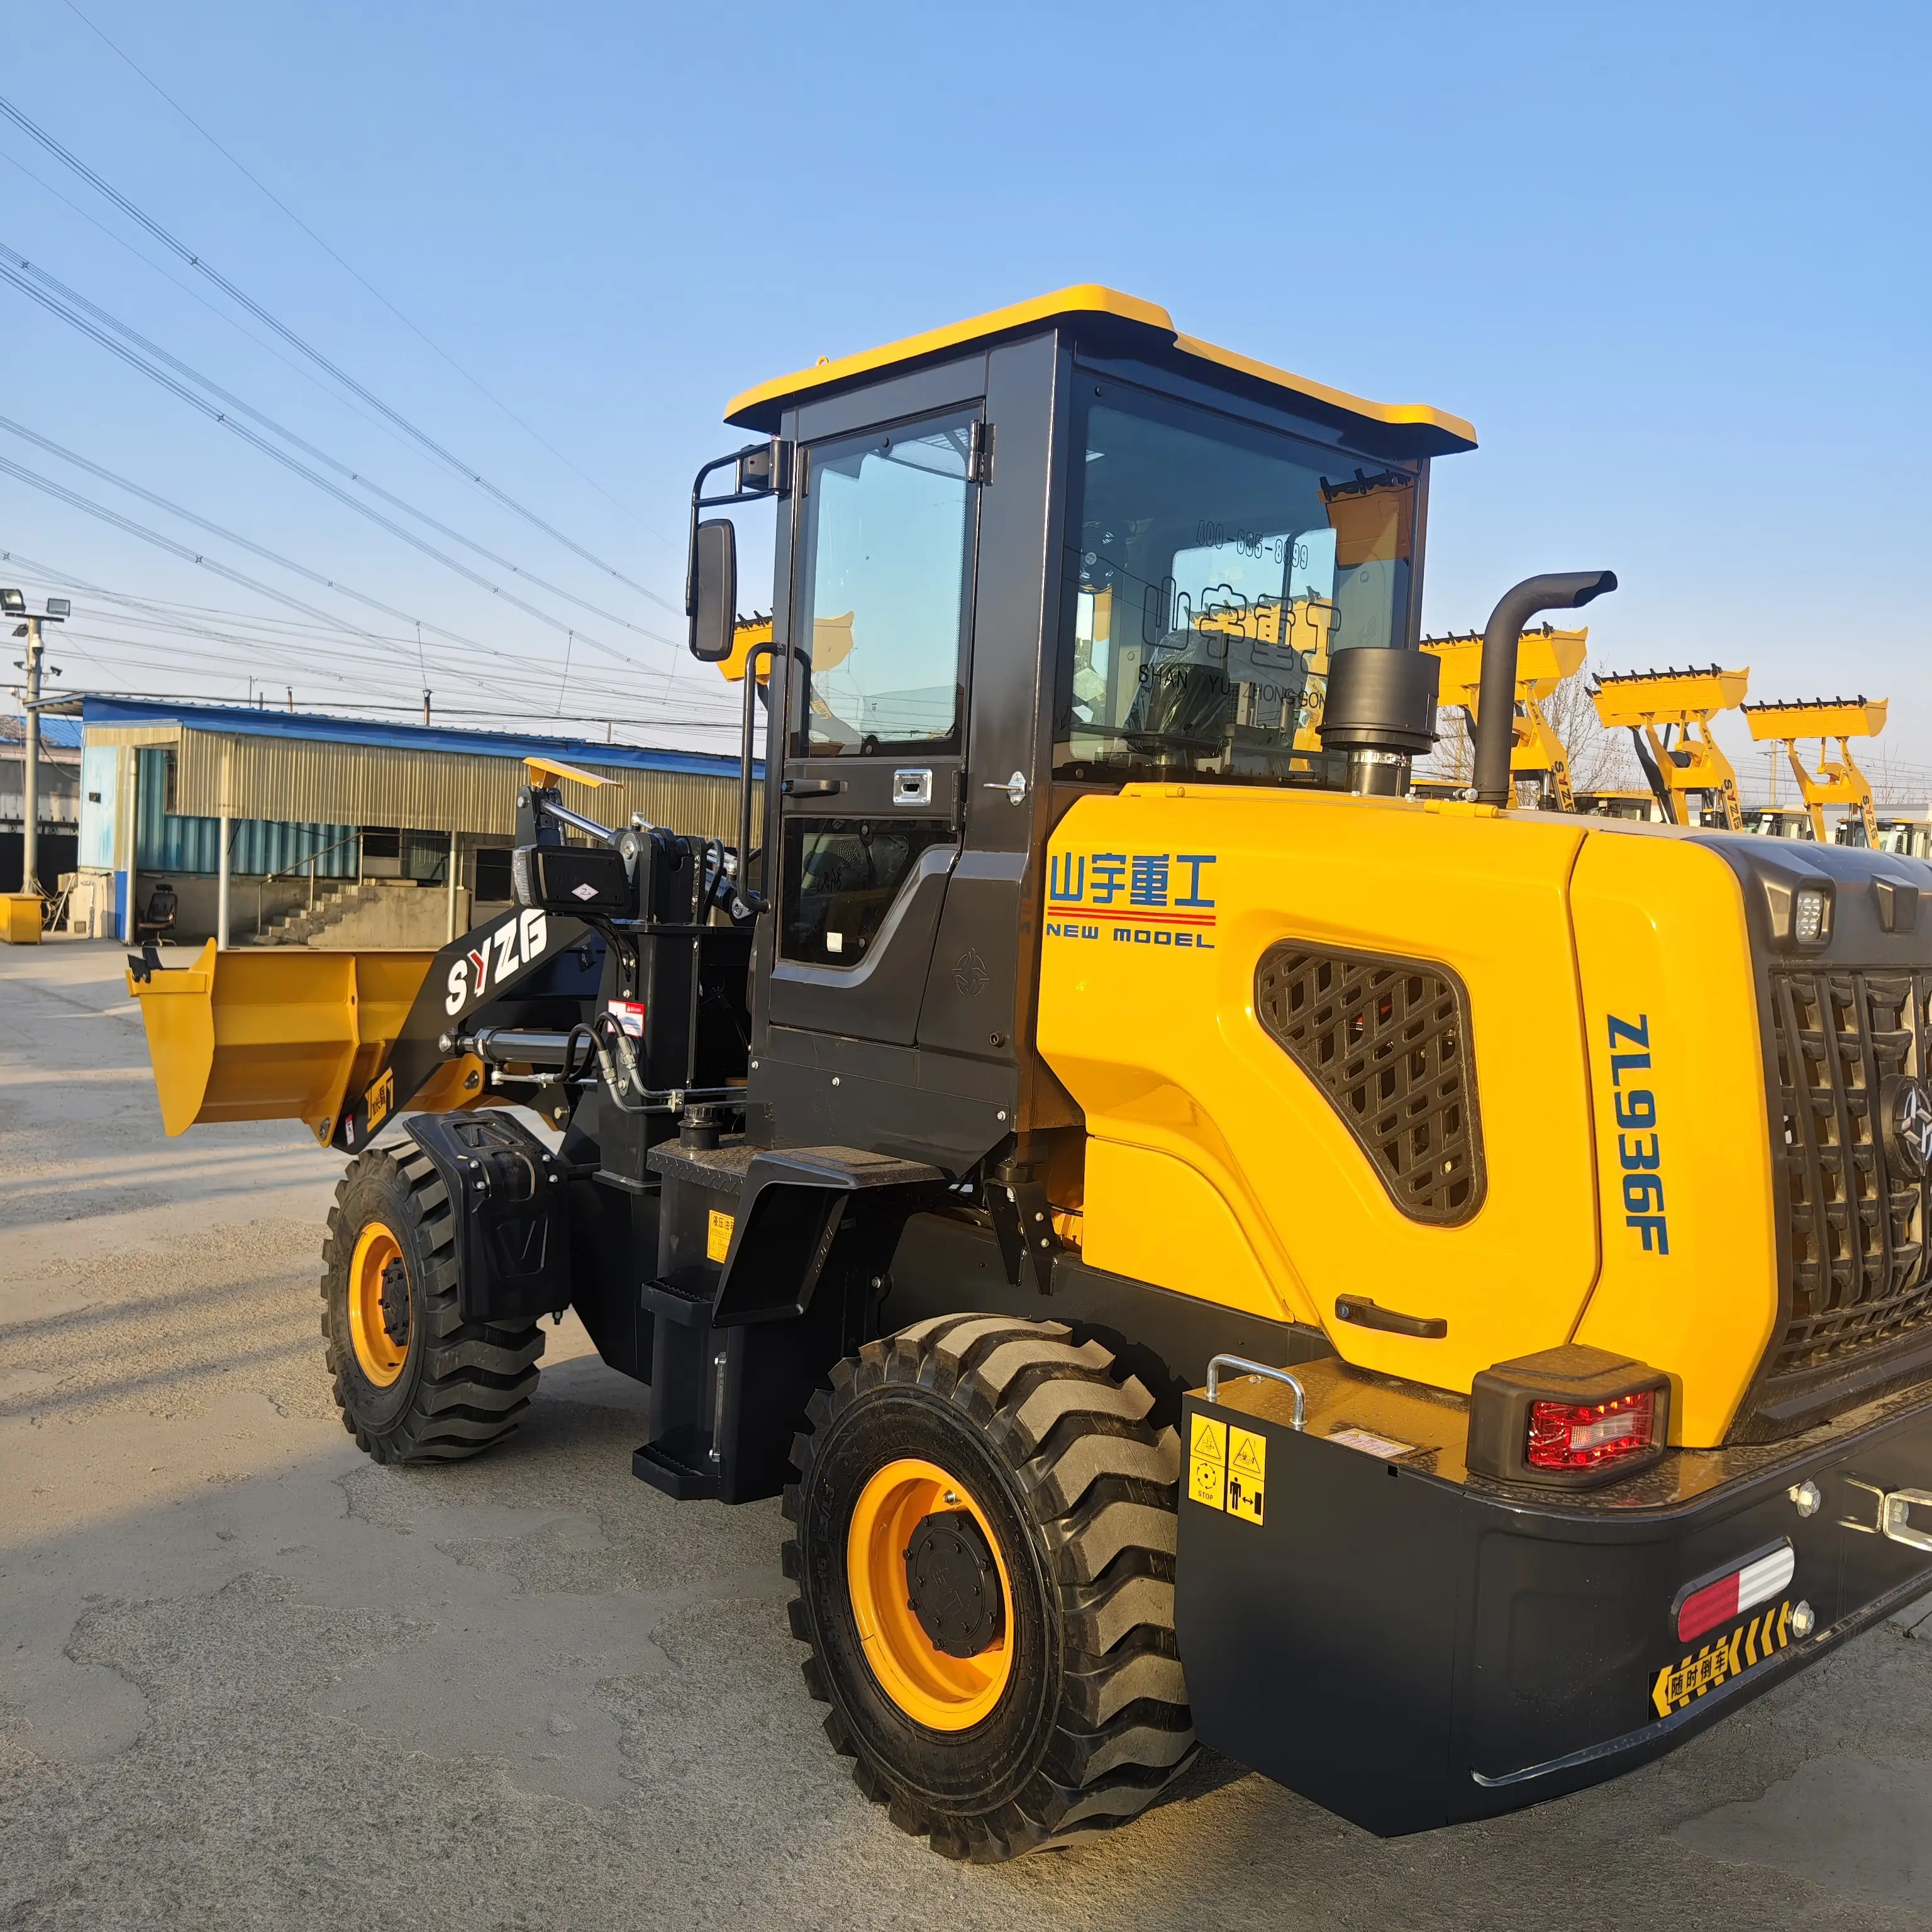 ISUZU Arrivals SYZG936 Construction Works Backhoe Skid Steer Wheel Loader Good Quality New Automatic 2 Ton Mechanical 1800mm